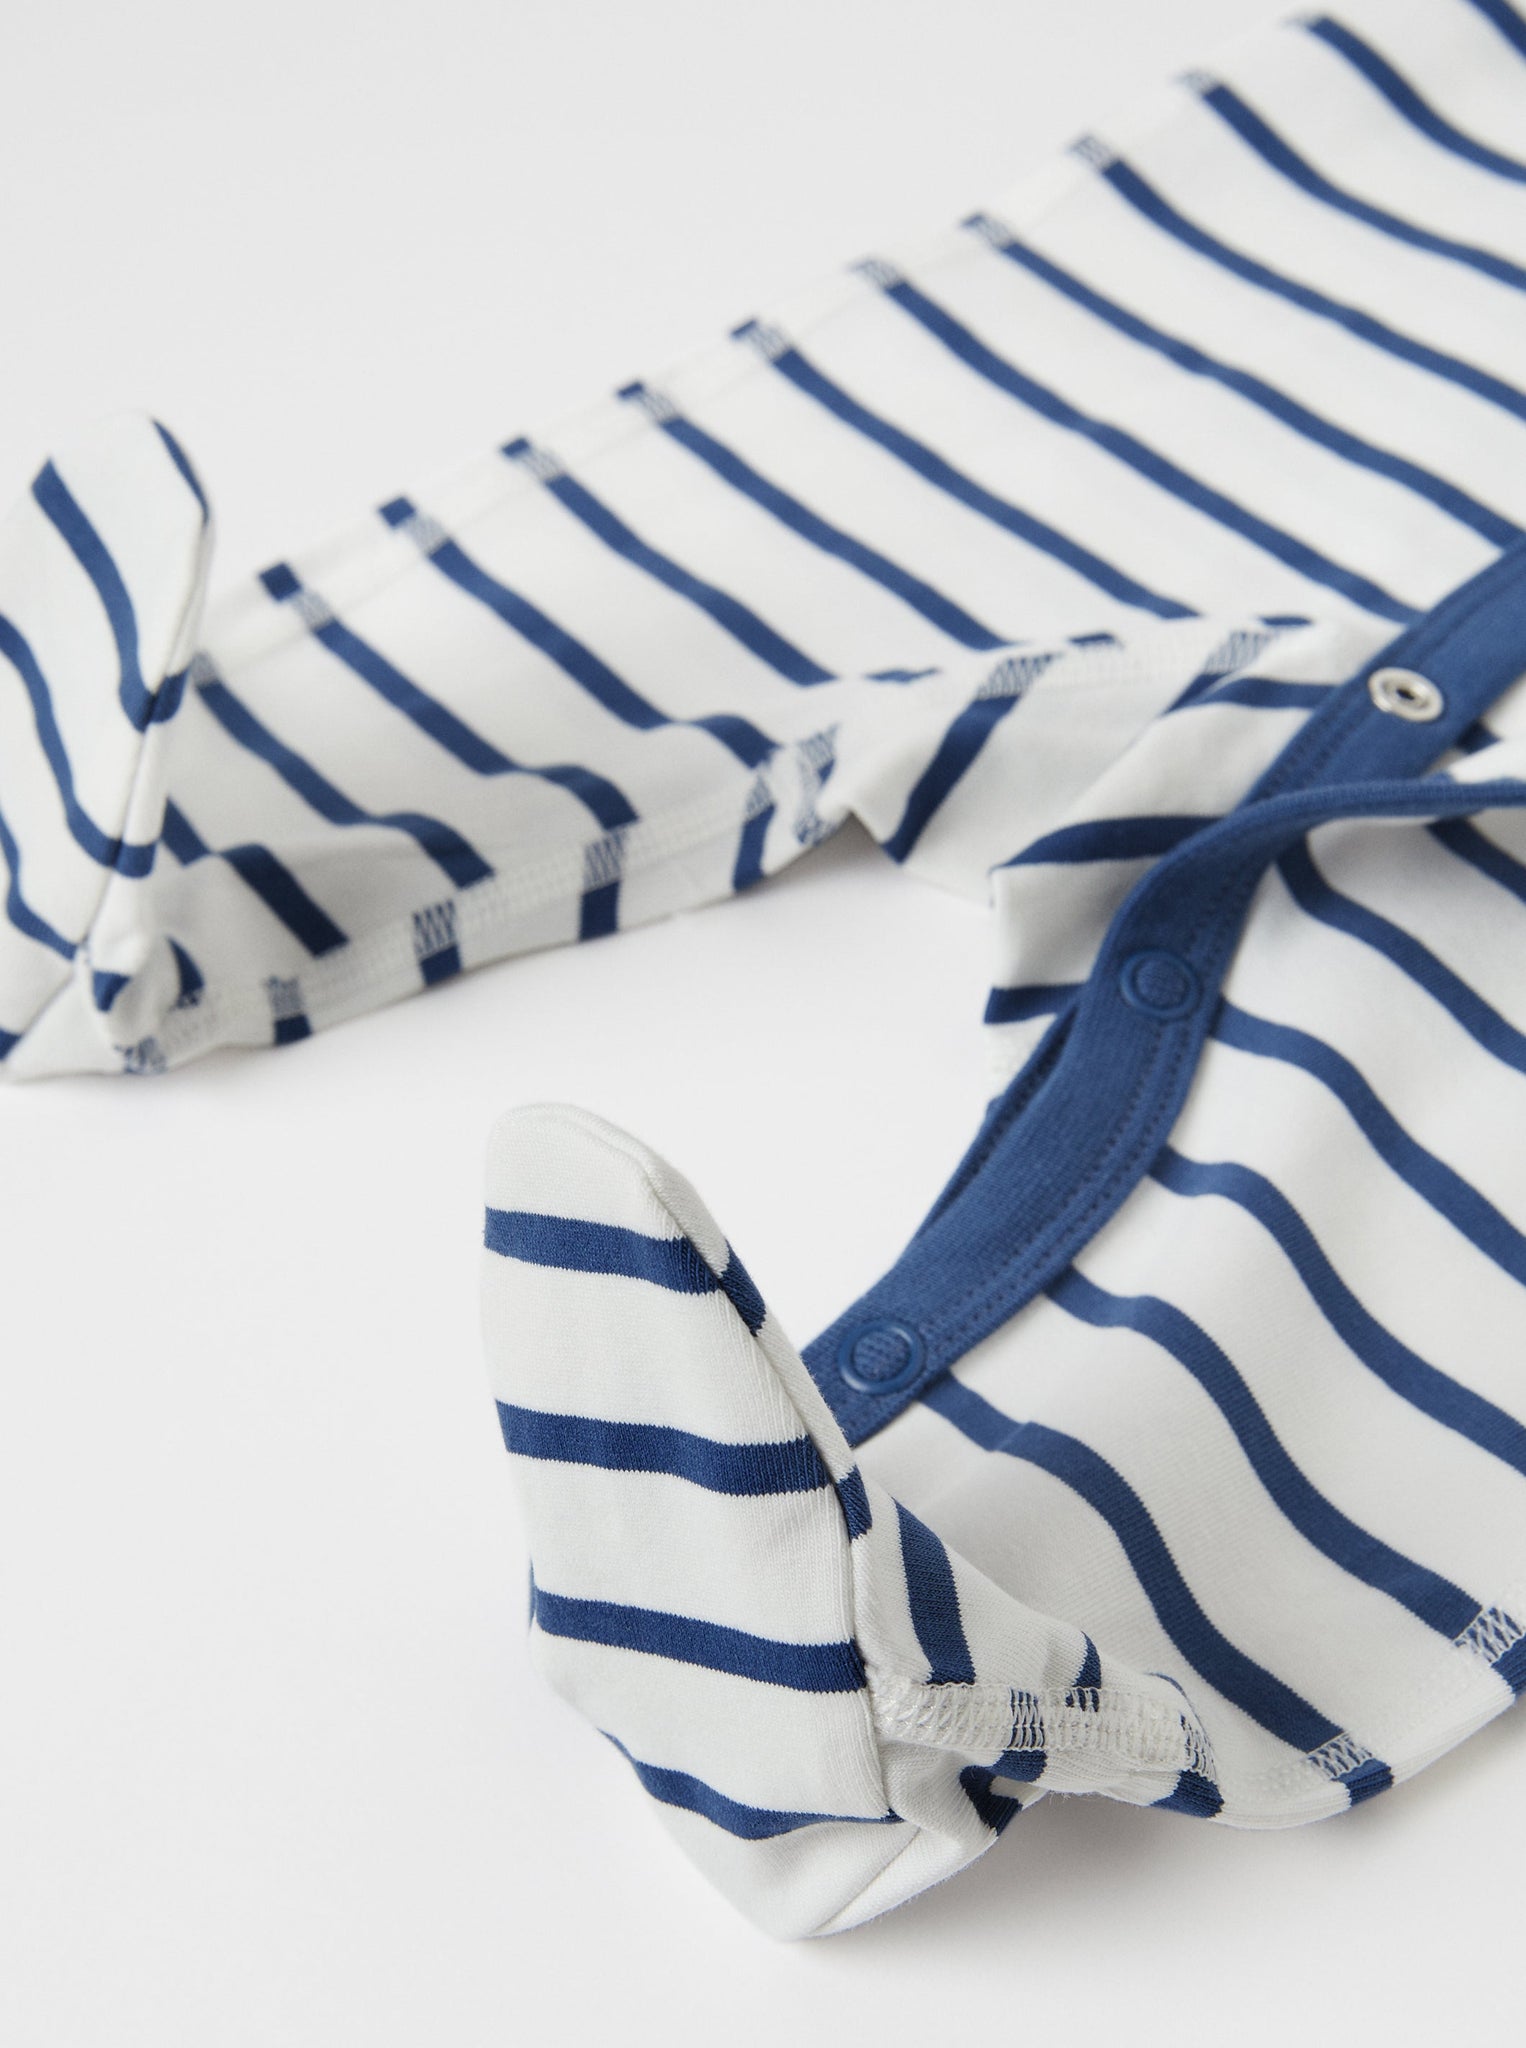 Organic Cotton Striped Baby Sleepsuit from the Polarn O. Pyret babywear collection. Ethically produced kids clothing.